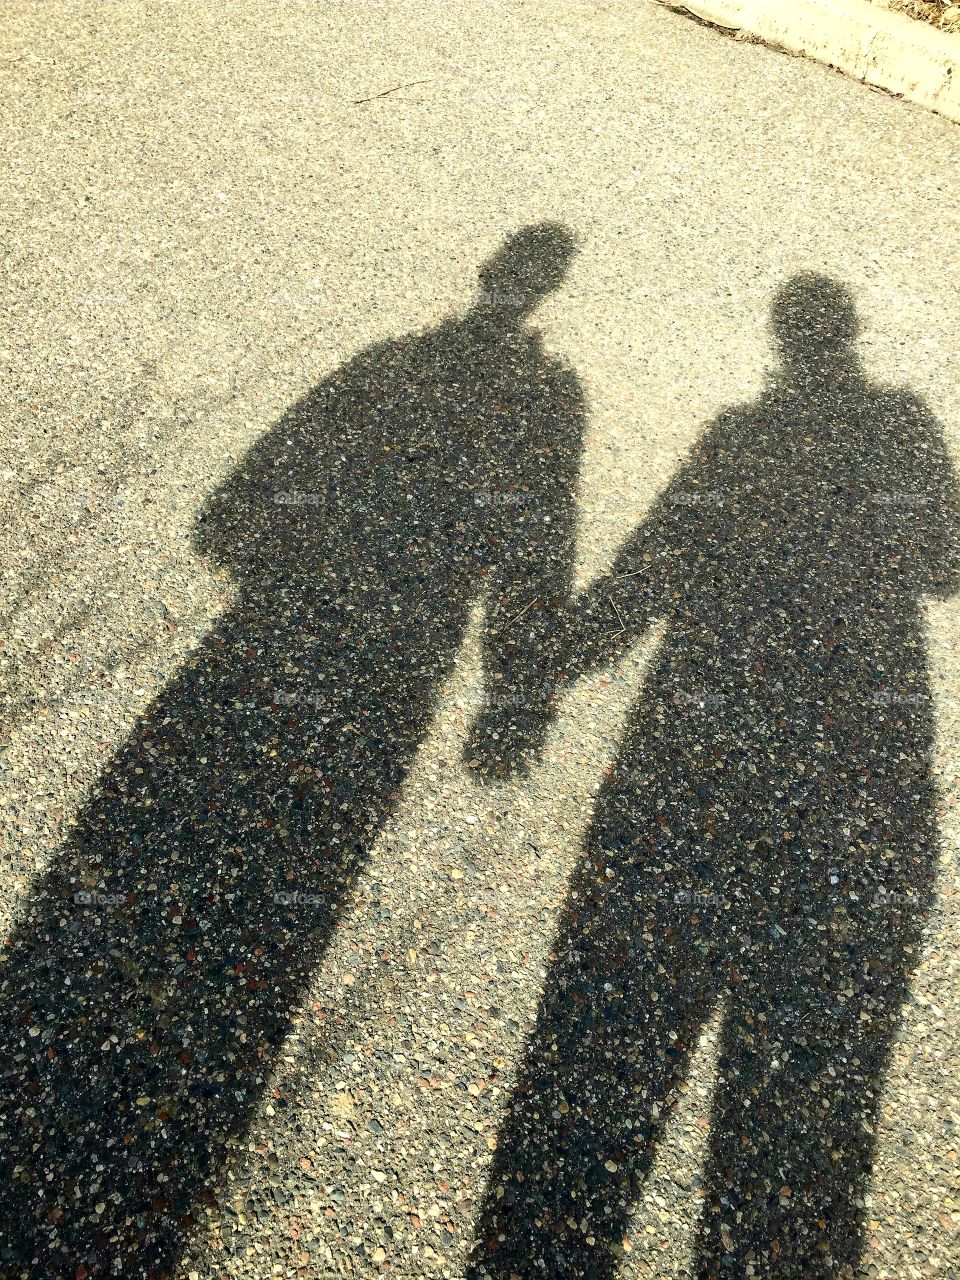 Shadow lovers holding hands.